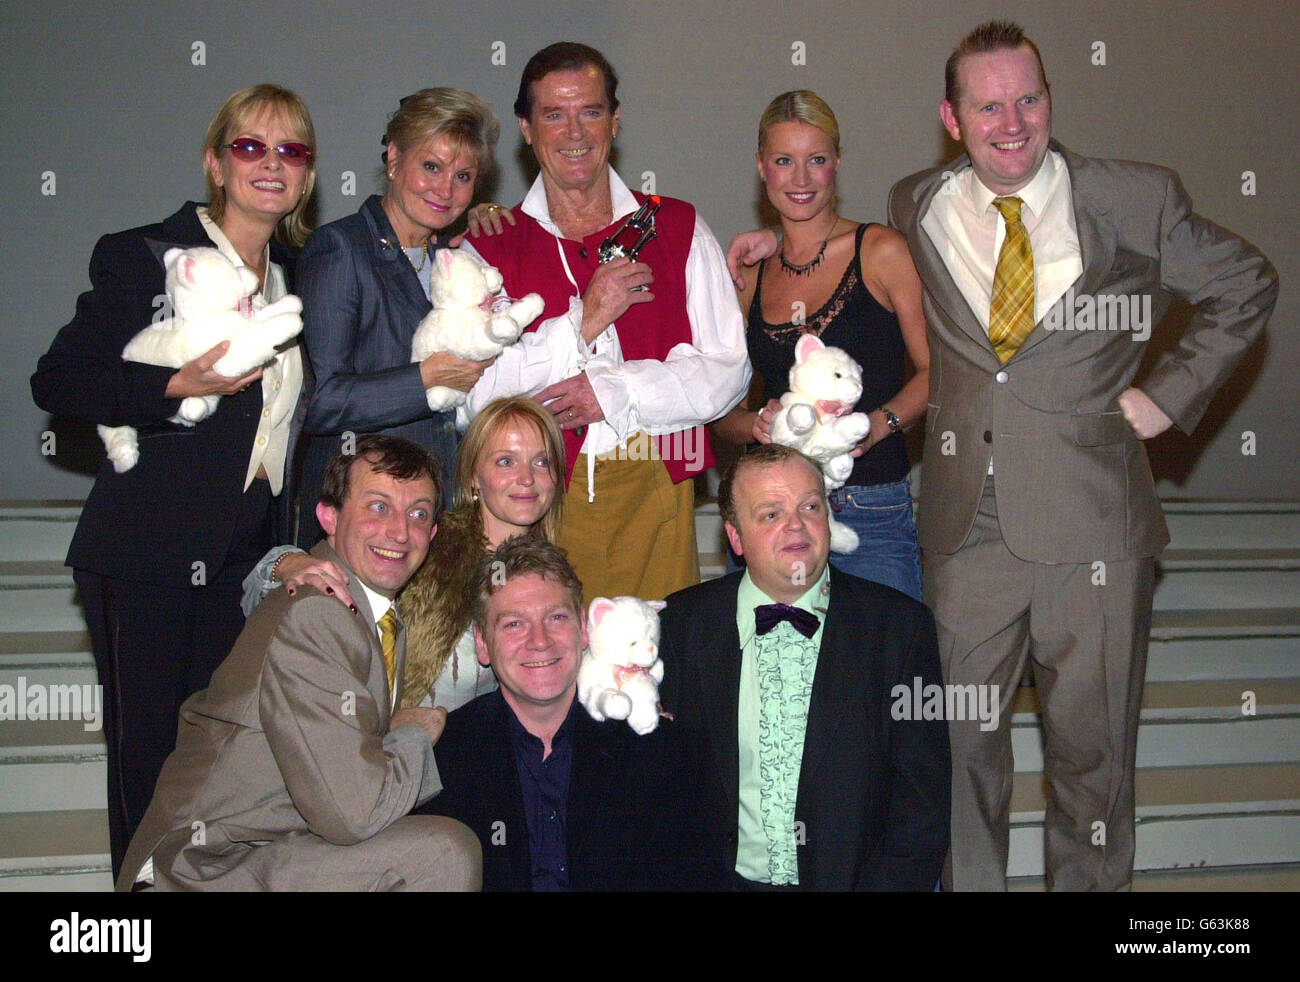 Back row; Twiggy, angela Rippon, Roger Moore, Denise Van Outen and Sean Foley. Front row; Hamish McColl, Miranda Richardson, Kenneth Branagh and Toby Jones on stage after the curtain came down during a charity performance of 'The Play What I Wrote' directed by Kenneth Branagh at the Wyndham Theatre in London's west end. Stock Photo